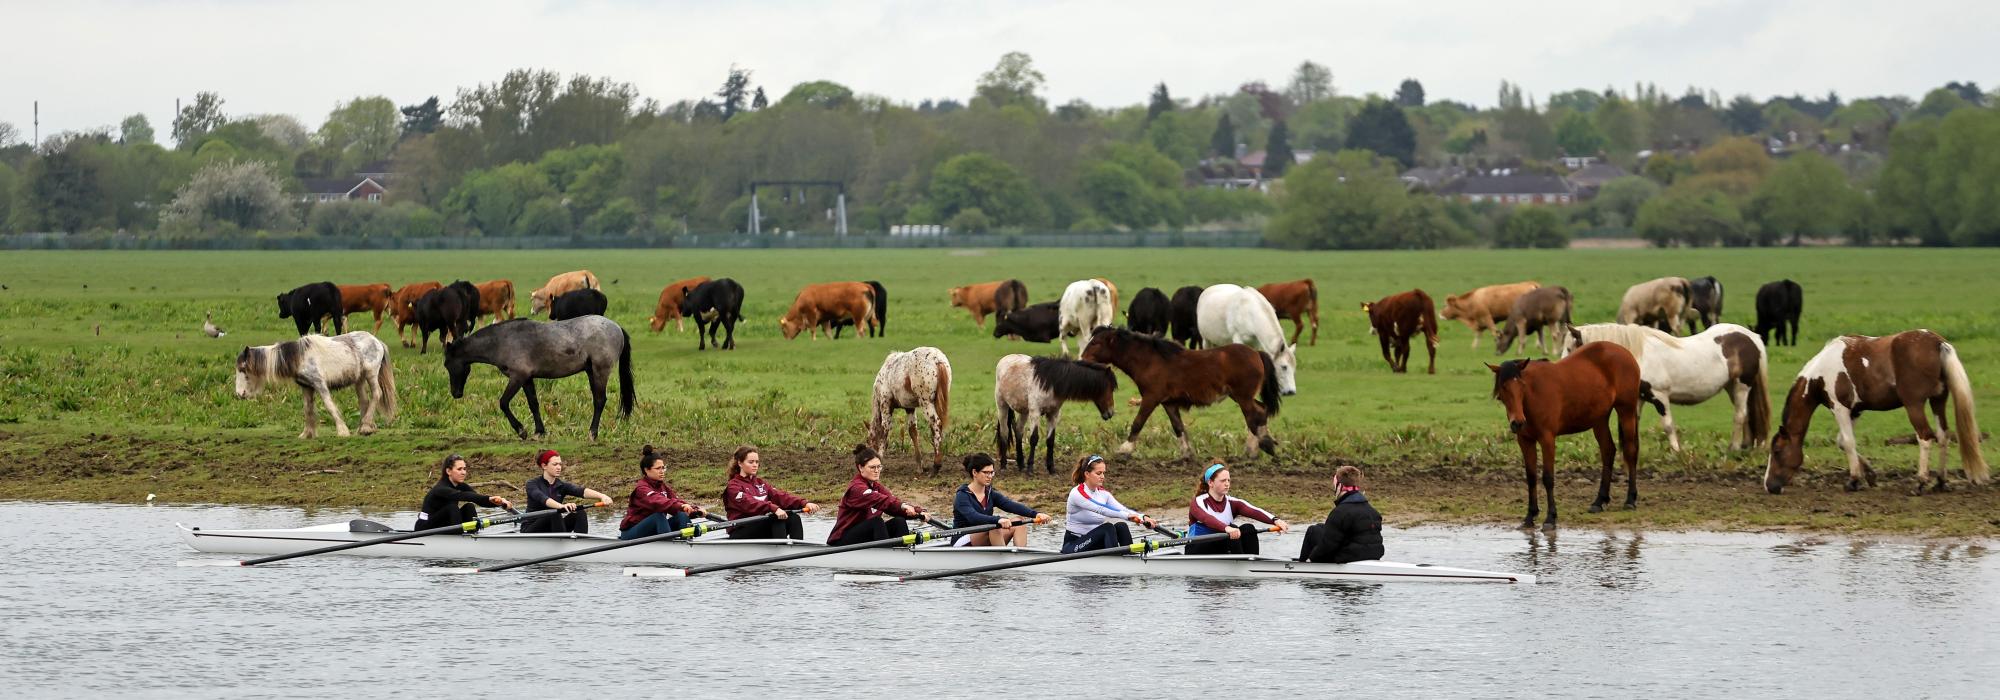 women rowing in the river with horses on the bank and the field next to the river